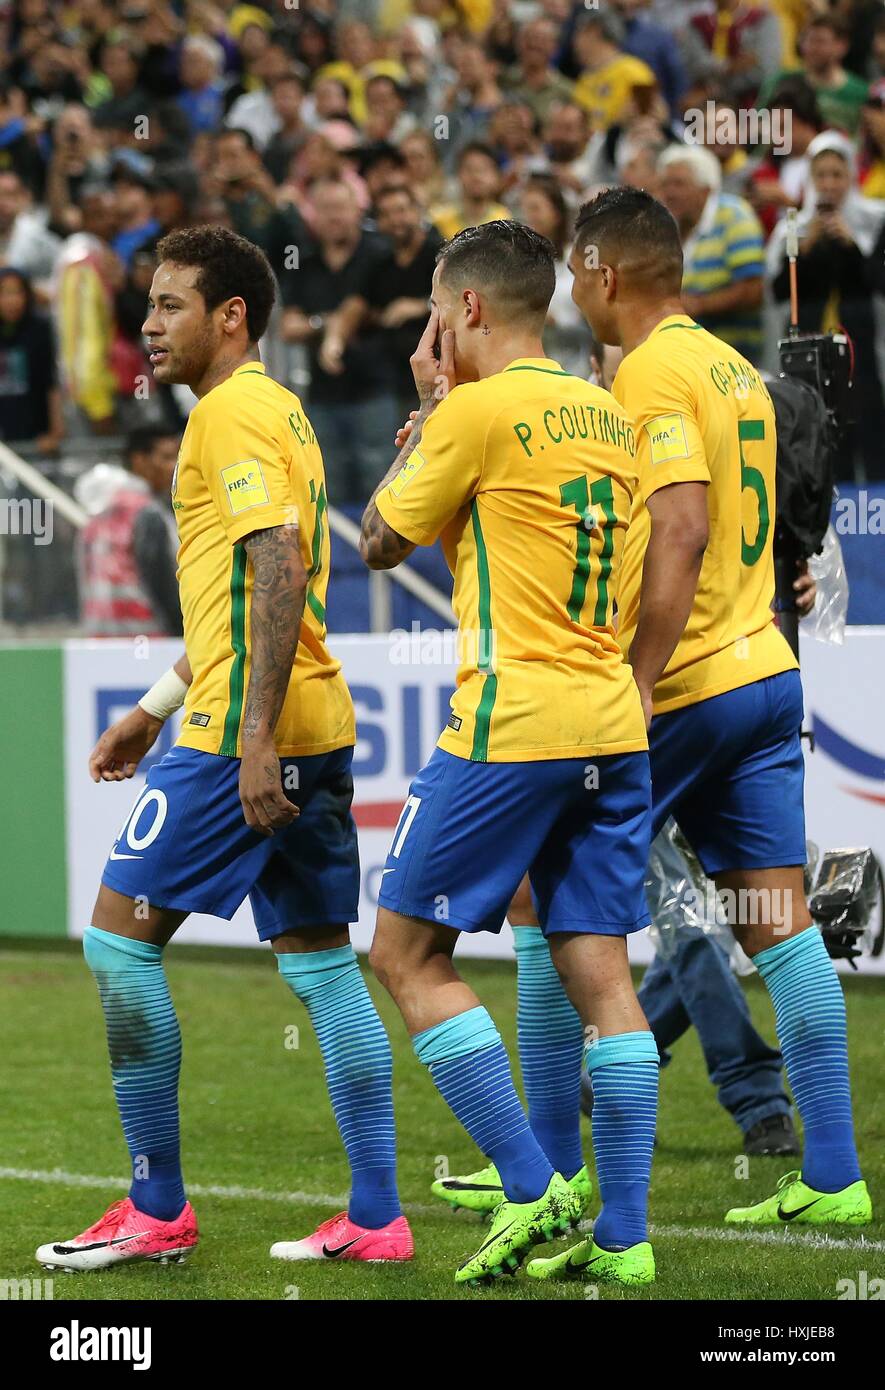 Sao Paulo, Brazil. 28th Mar, 2017. Neymar (L) of Brazil reacts after the referee claimed his second goal invalid during the 2018 FIFA World Cup qualifiers round match against Paraguay at the Arena Corinthians in Sao Paulo, Brazil, on March 28, 2017. Brazil won 3-0. Credit: Li Ming/Xinhua/Alamy Live News Stock Photo